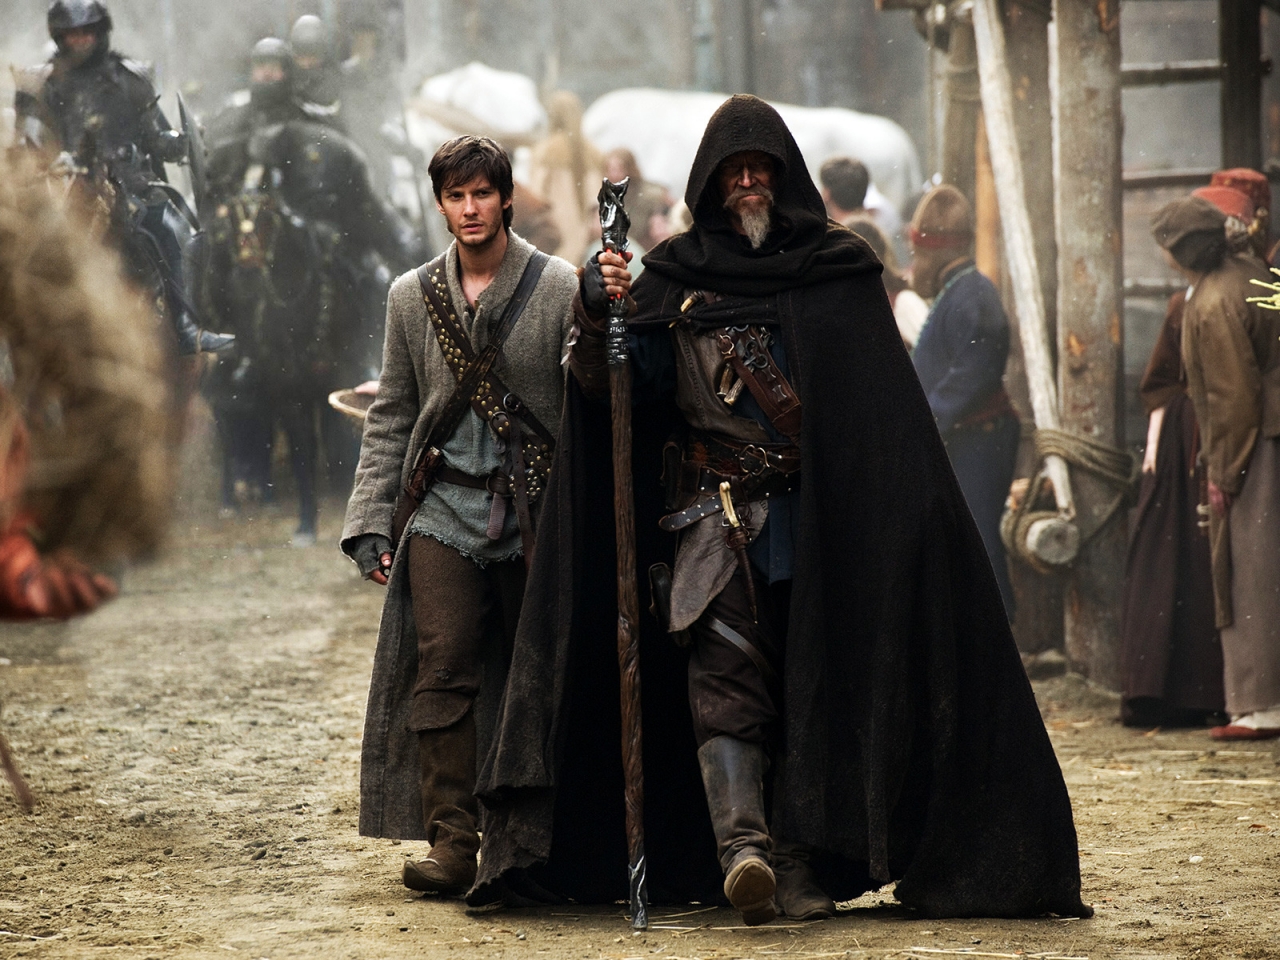 The Seventh Son Movie 2013 for 1280 x 960 resolution